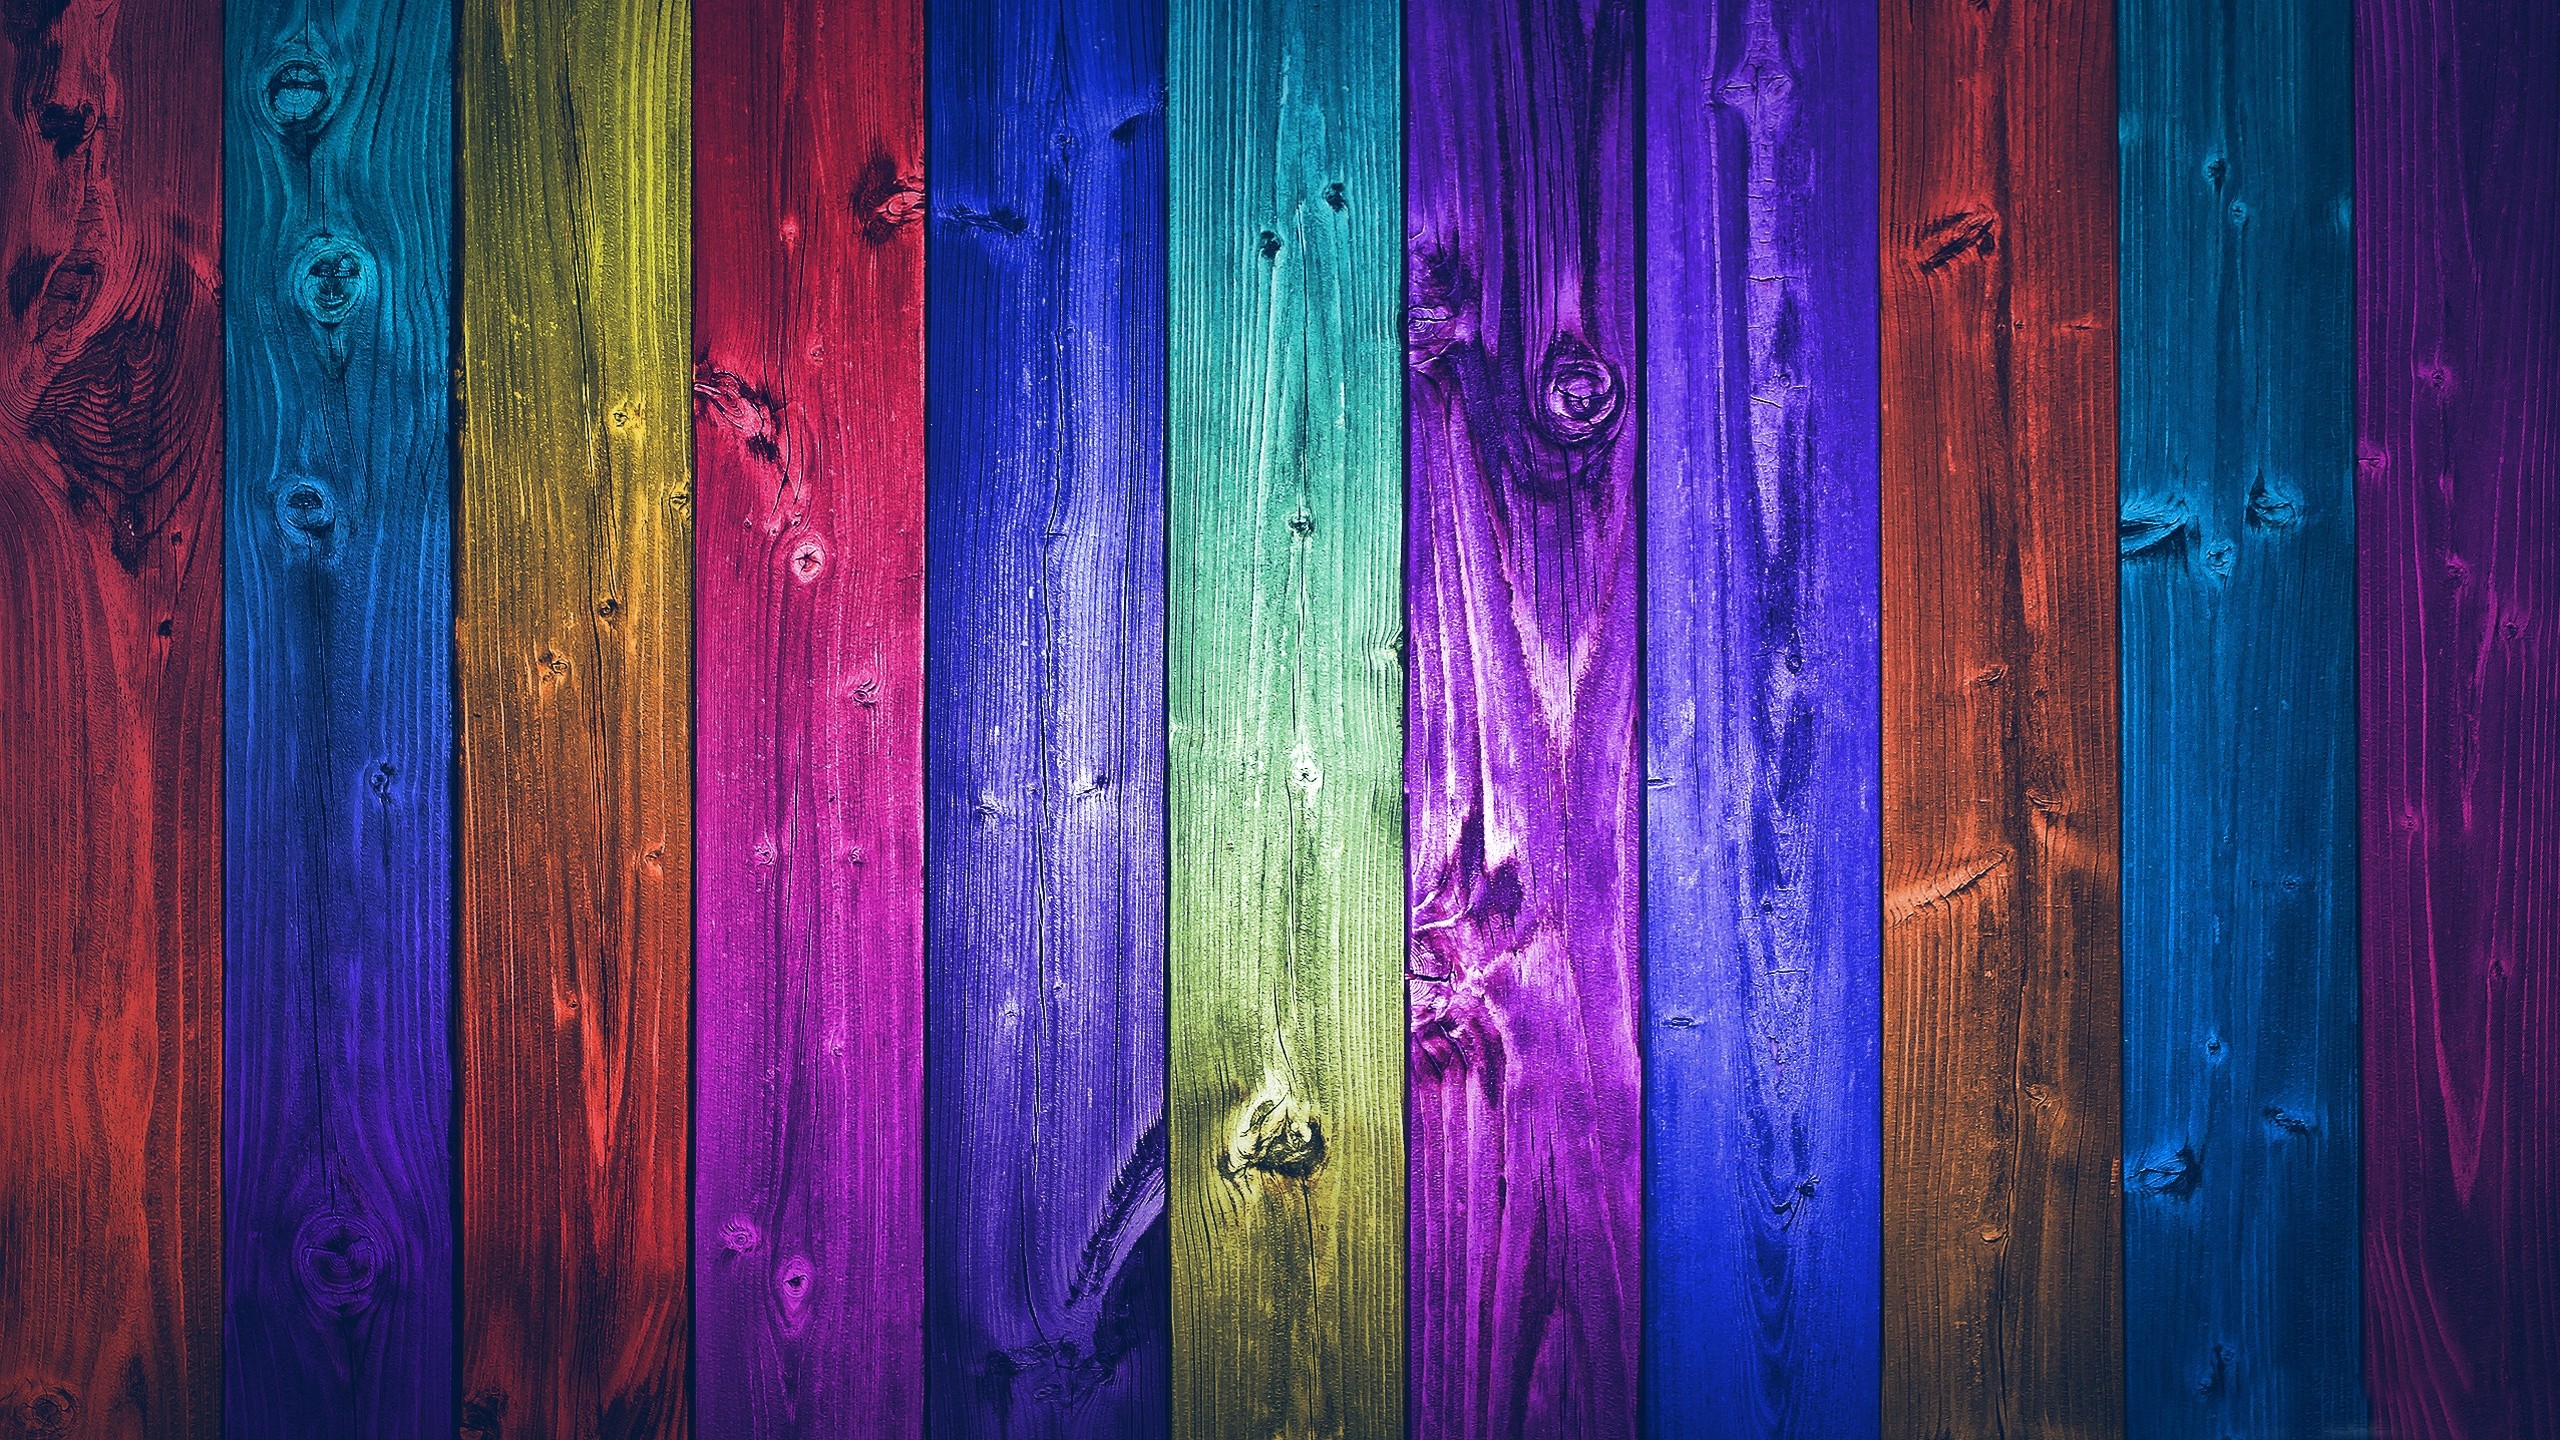 General 2560x1440 wood colorful texture wooden surface panels